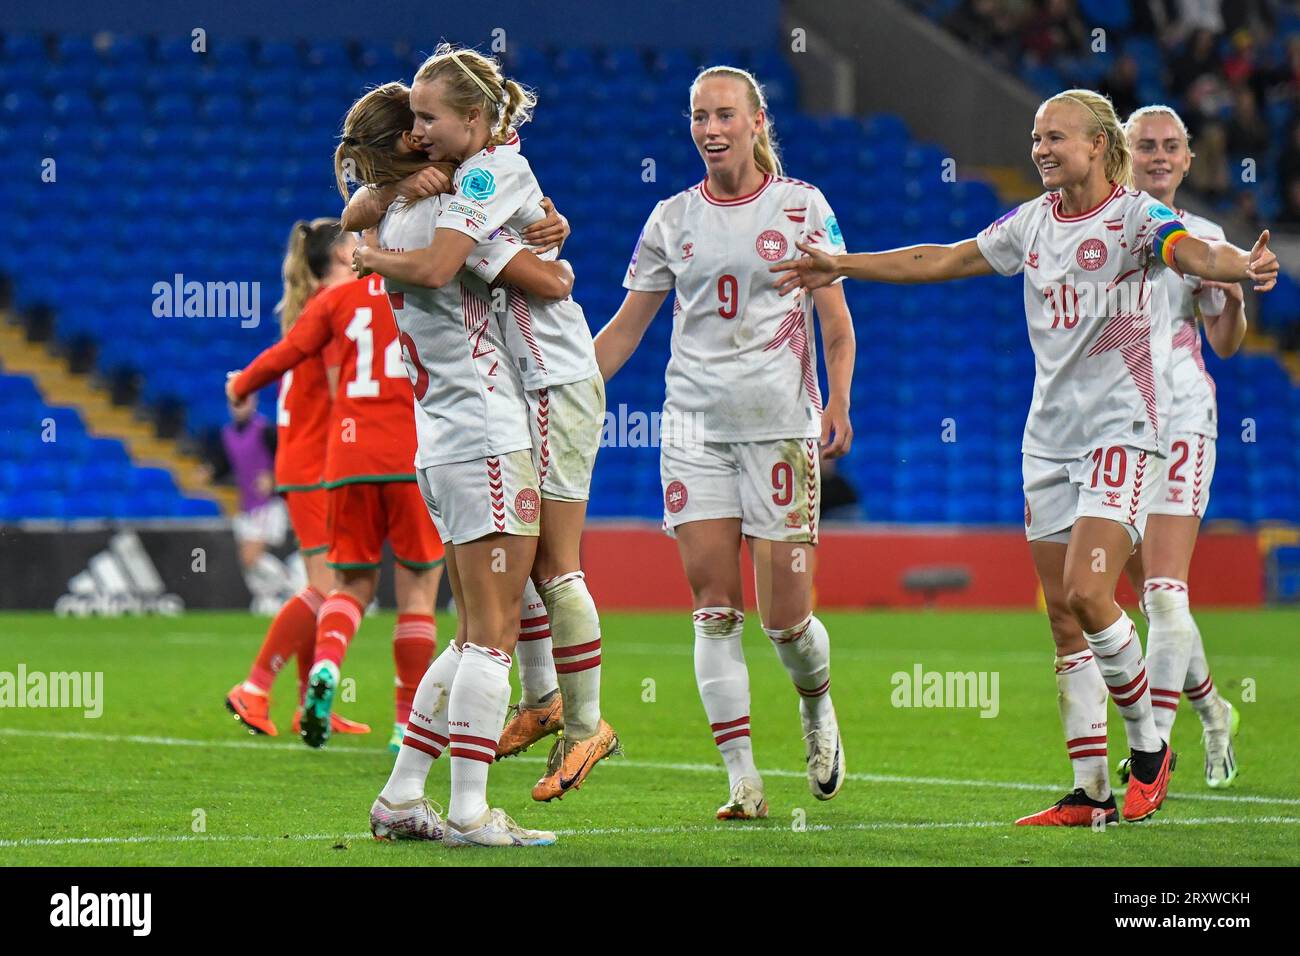 Cardiff, Wales. 26 September 2023. Frederikke Th¿gersen of Denmark is congratulated by her team mates during the UEFA Women's Nations League match between Wales and Denmark at the Cardiff City Stadium in Cardiff, Wales, UK on 26 September 2023. Credit: Duncan Thomas/Majestic Media. Stock Photo